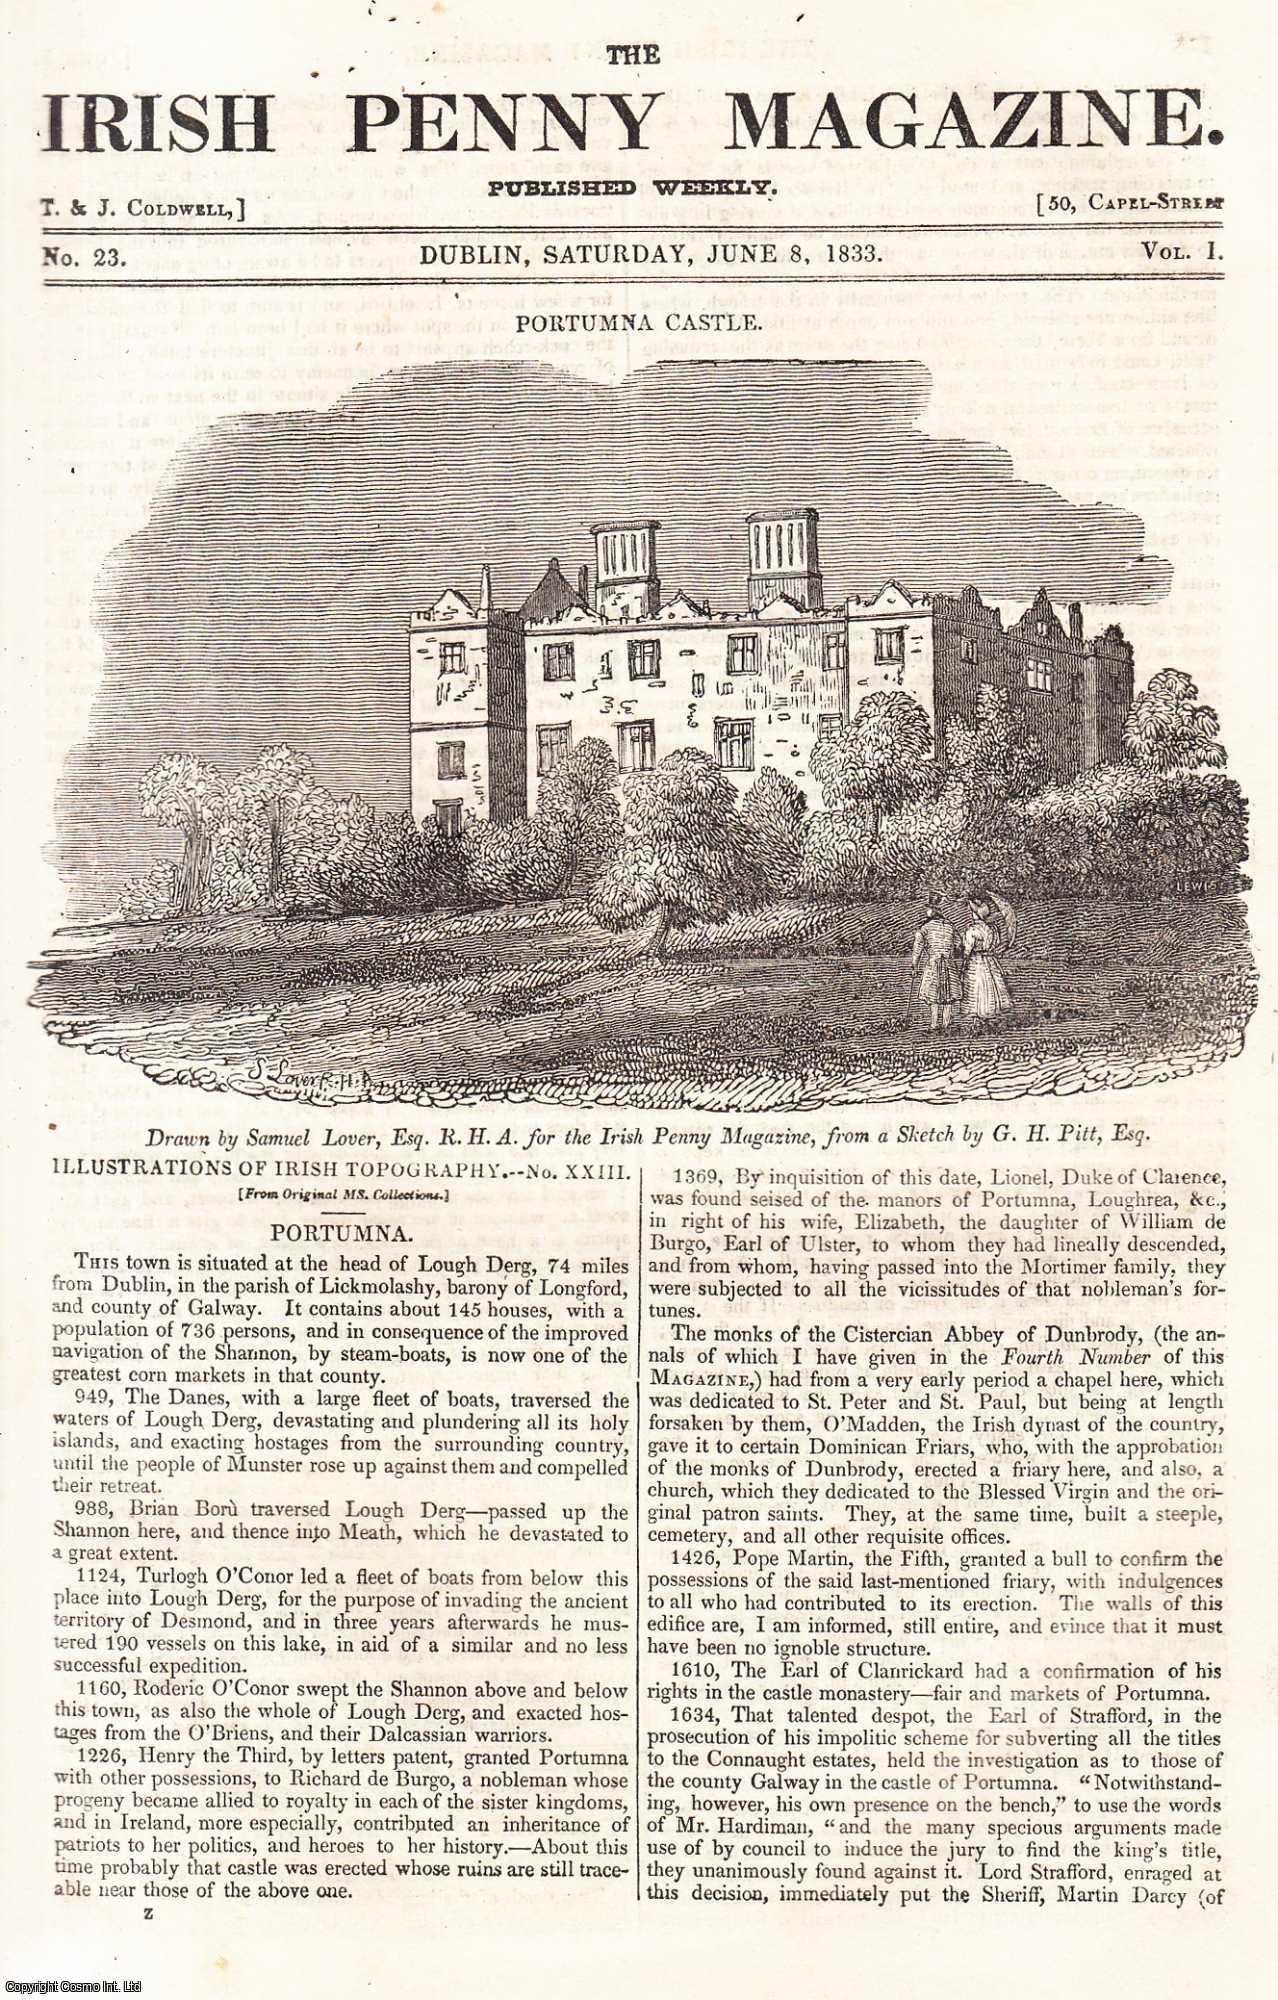 Irish Penny Magazine - 1833, Portumna & Portumna Castle. Featured in a full weekly issue of the uncommon Irish Penny Magazine, 1833.